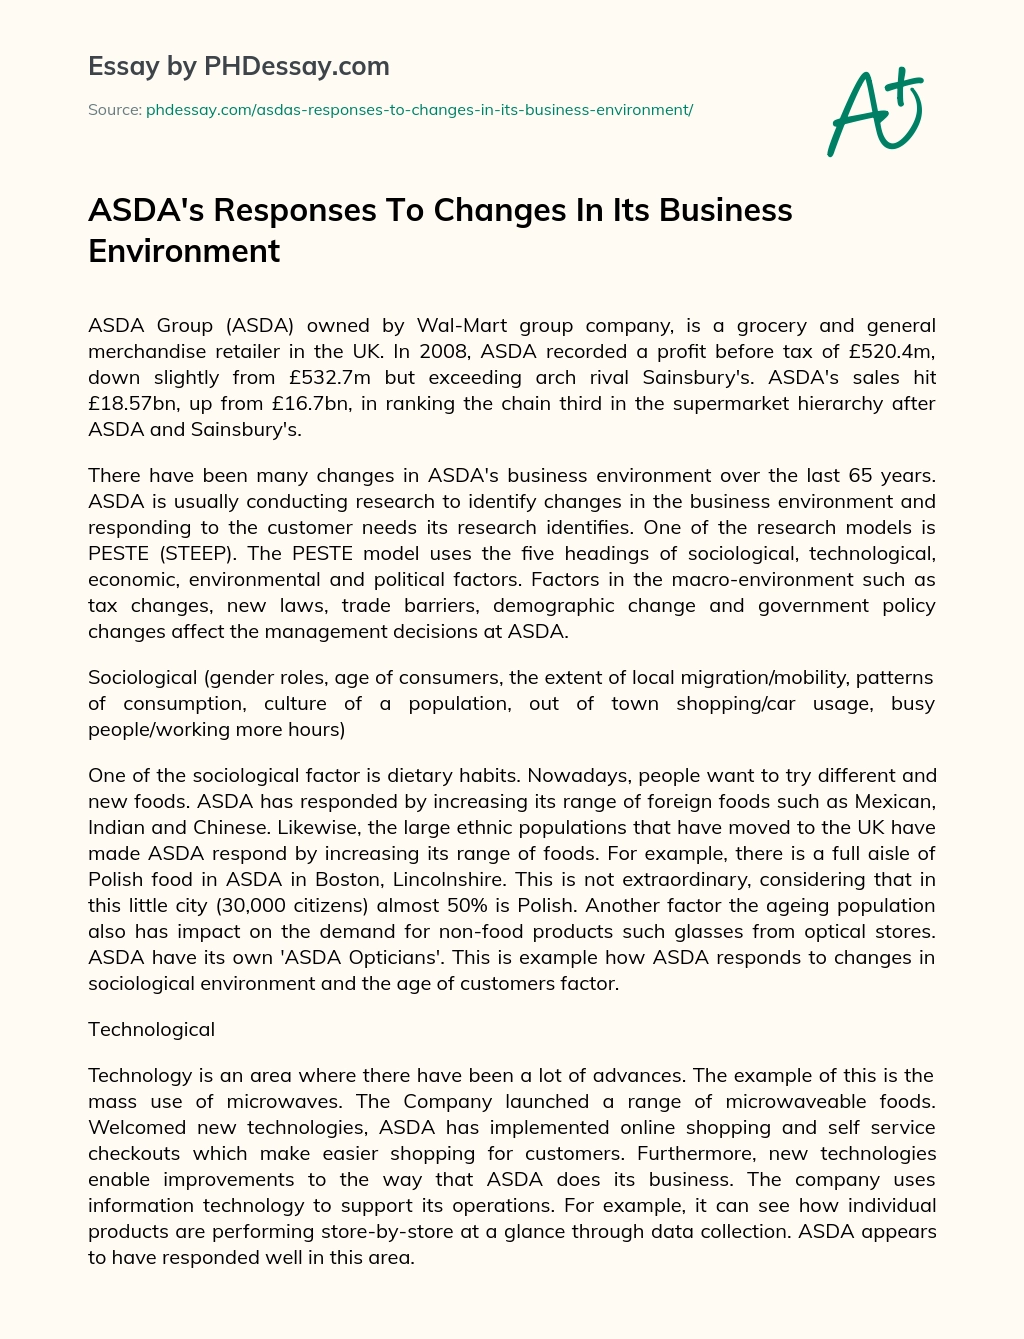 ASDA’s Responses To Changes In Its Business Environment essay